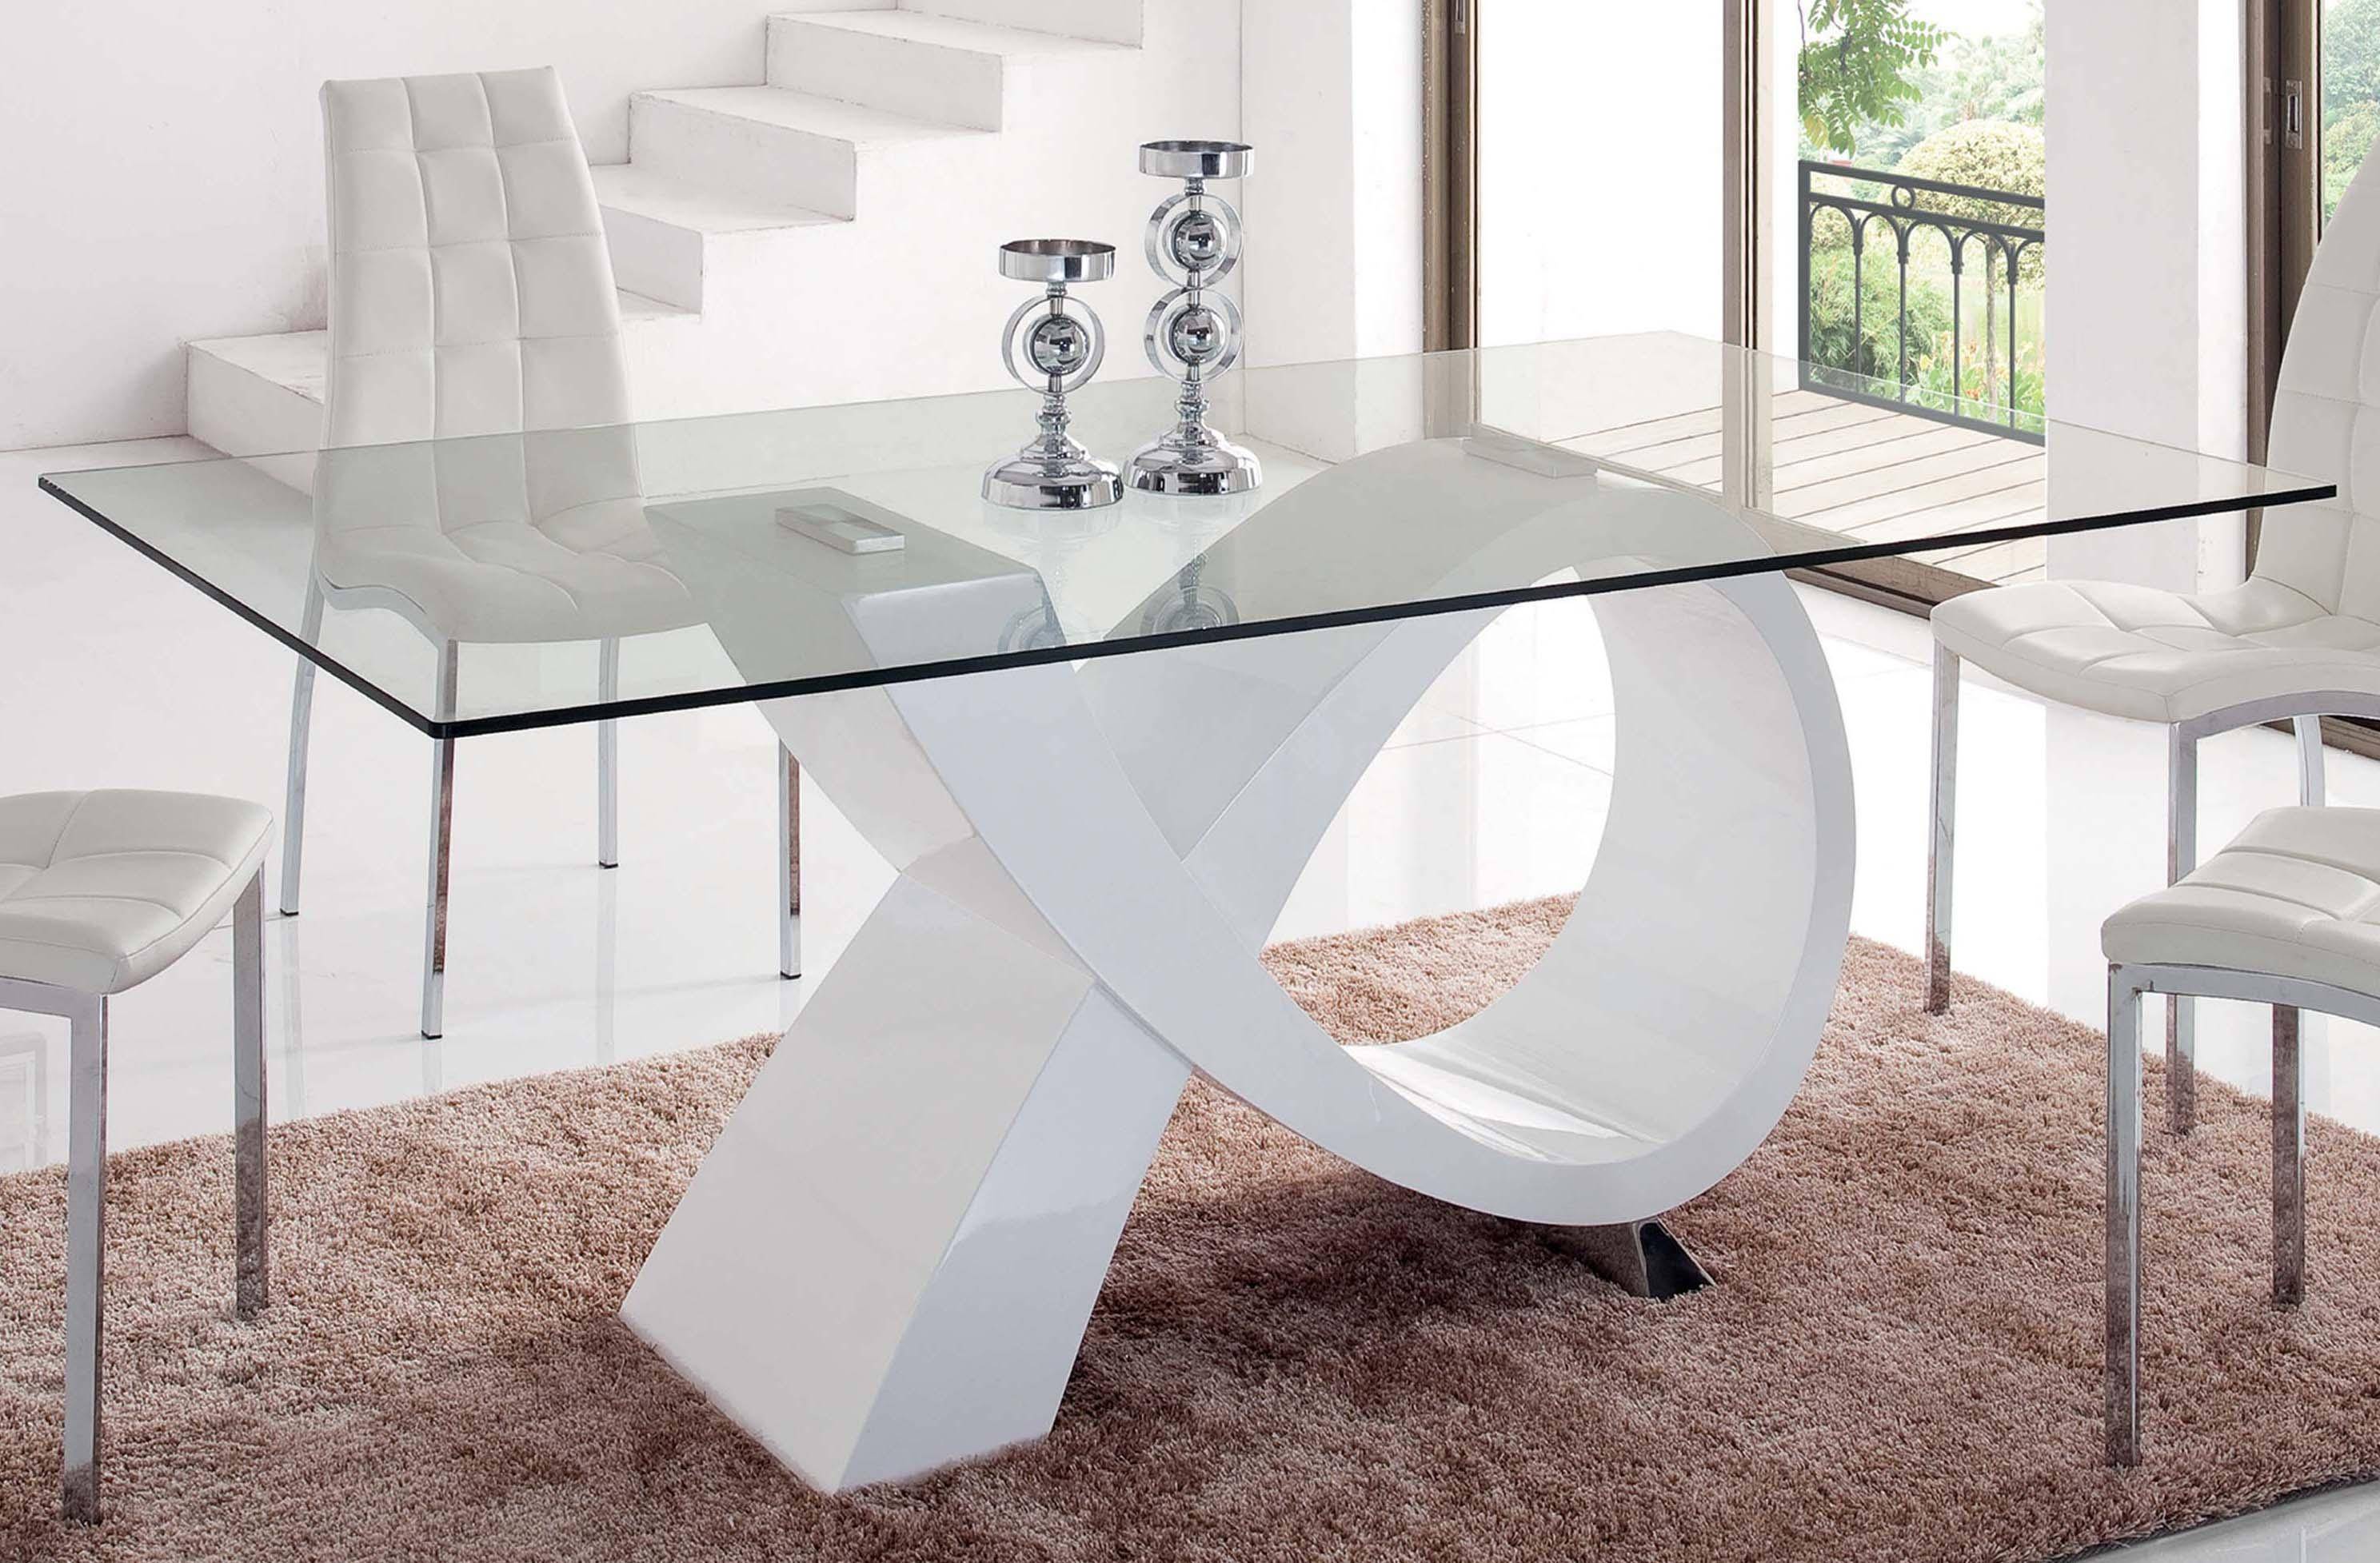 Buy Esf 989 Dining Table In Silver White Glass Top Online